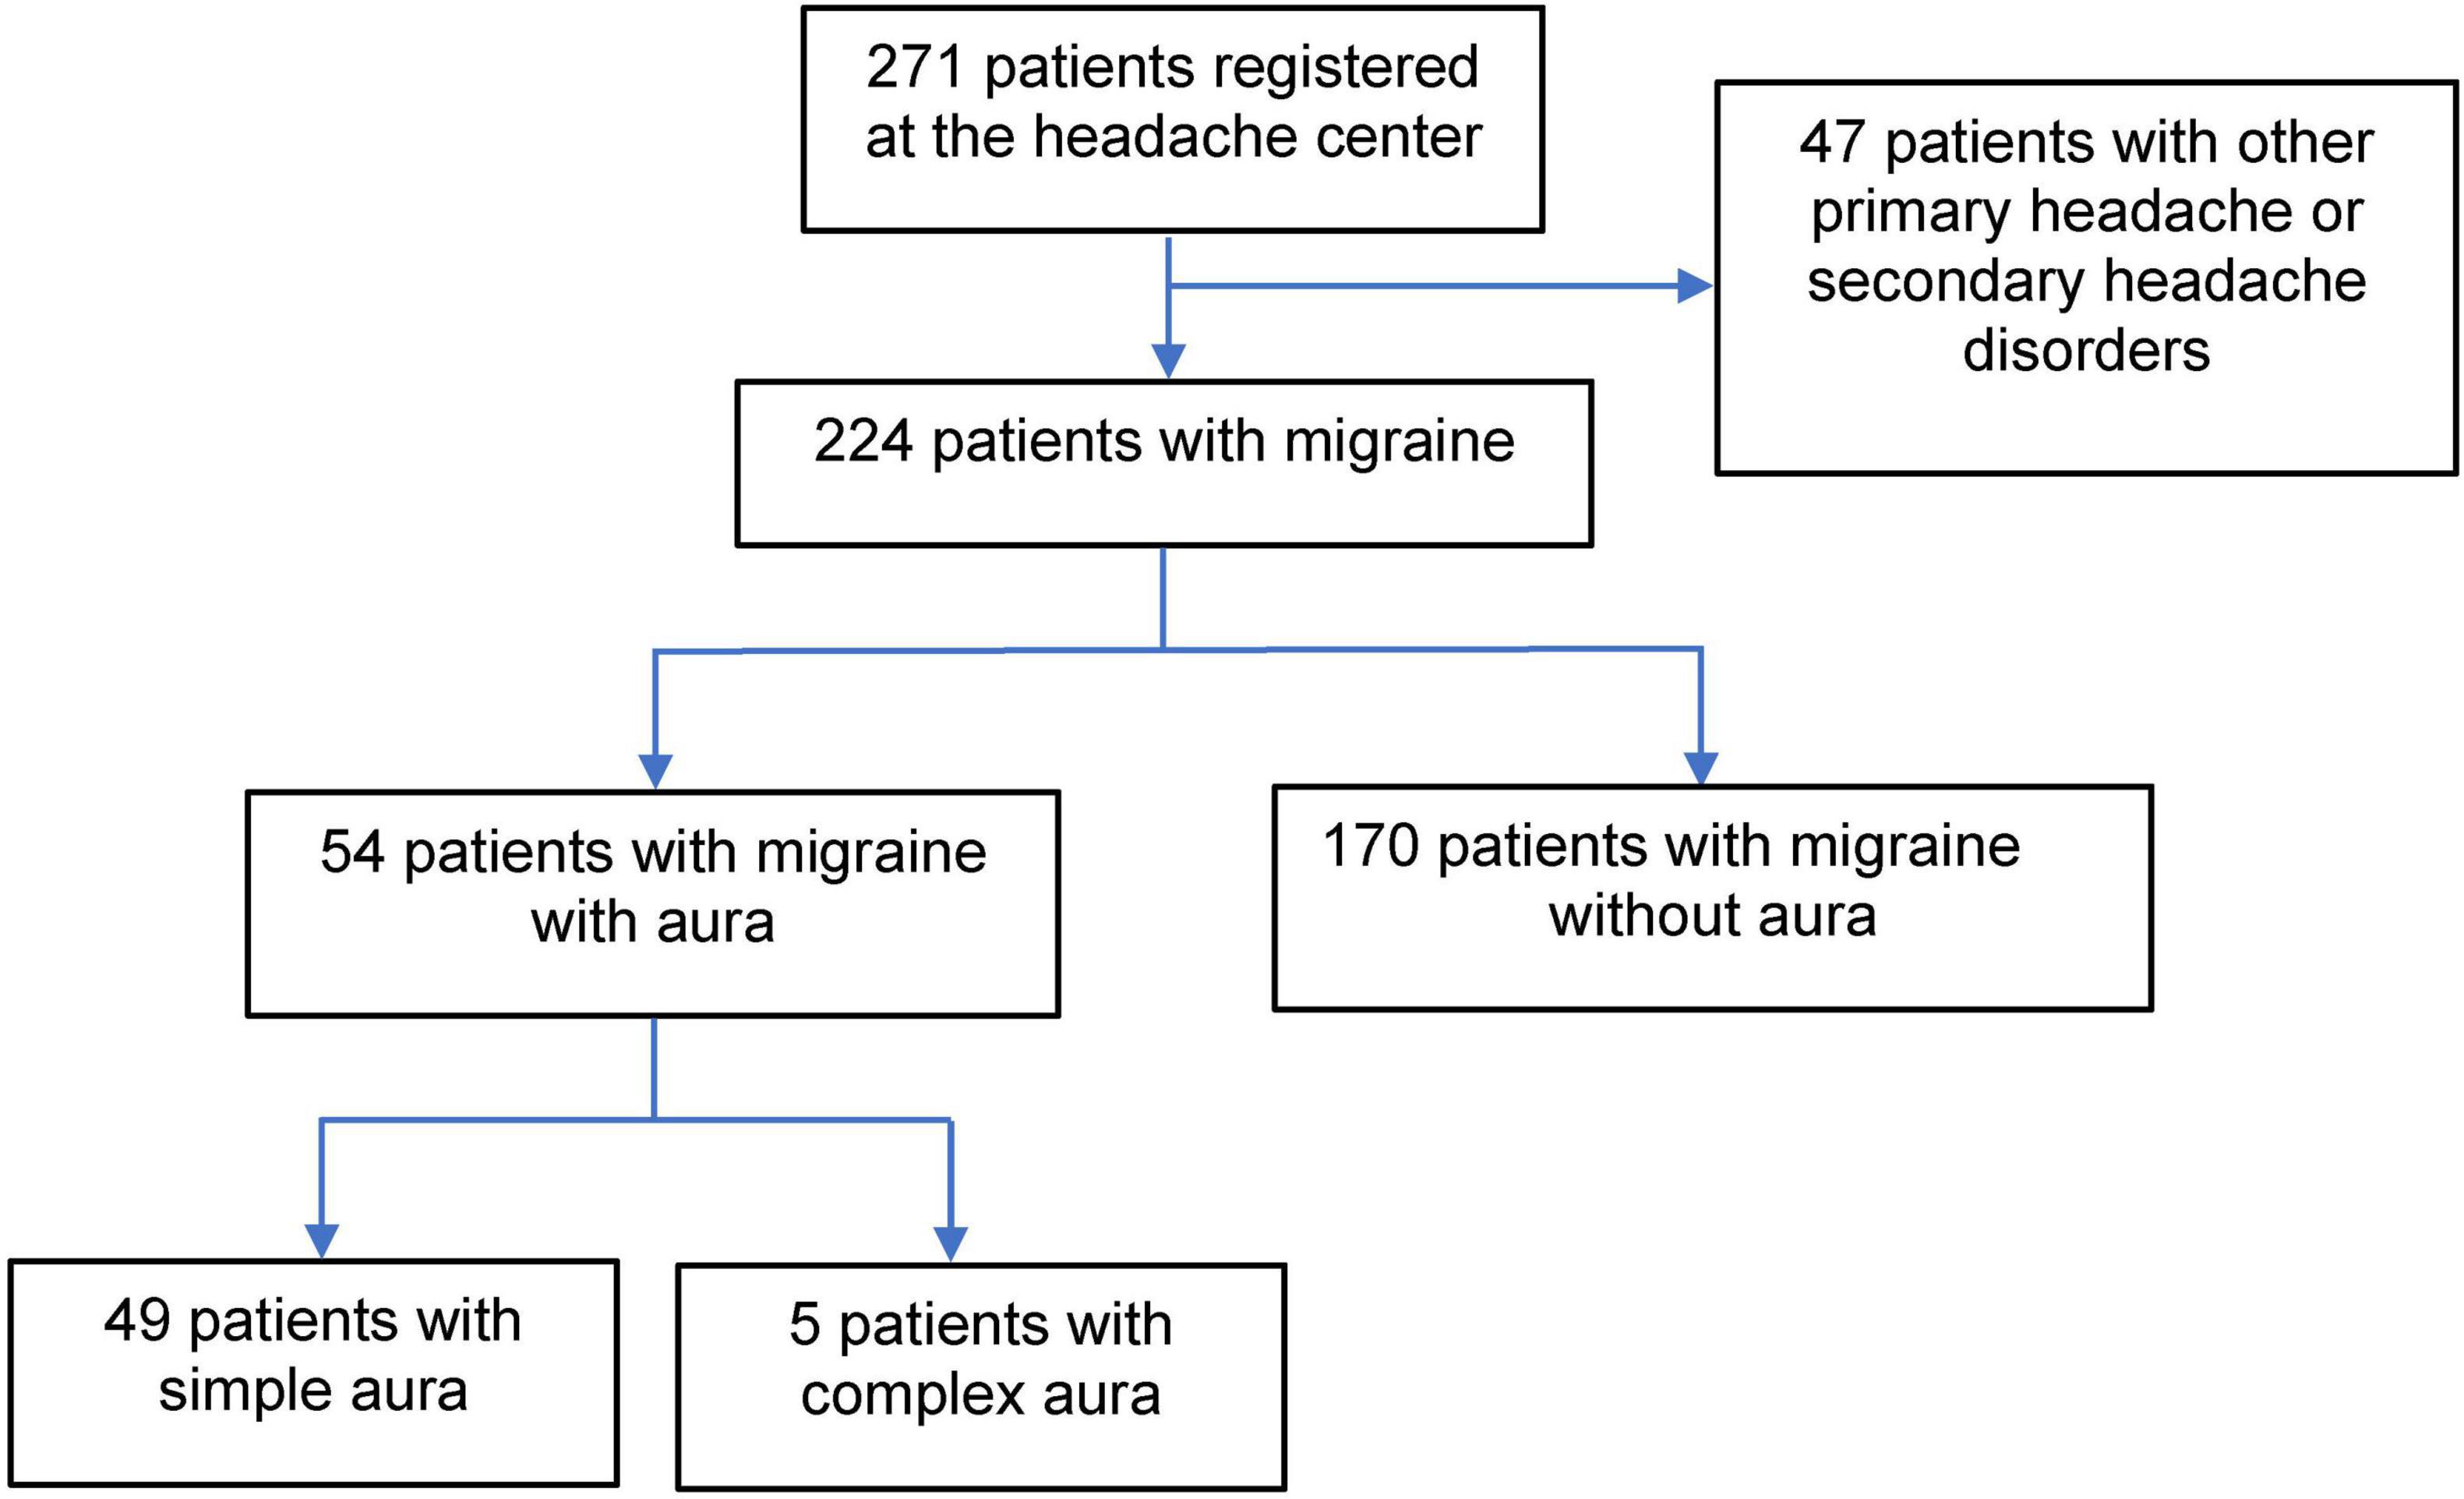 Preventive treatment response associated with migraine aura subtypes in a Thai population